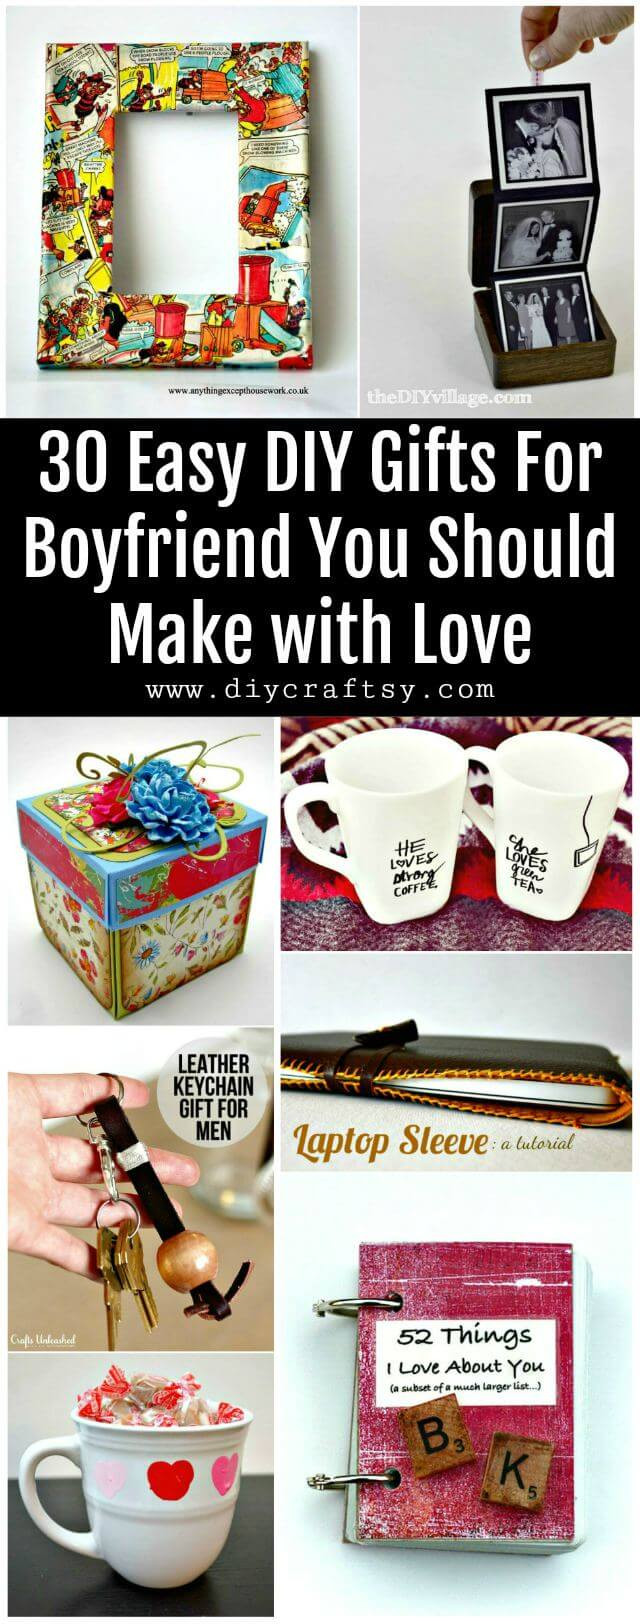 Easy DIY Gift For Boyfriend
 30 Easy DIY Gifts For Boyfriend You Should Make with Love